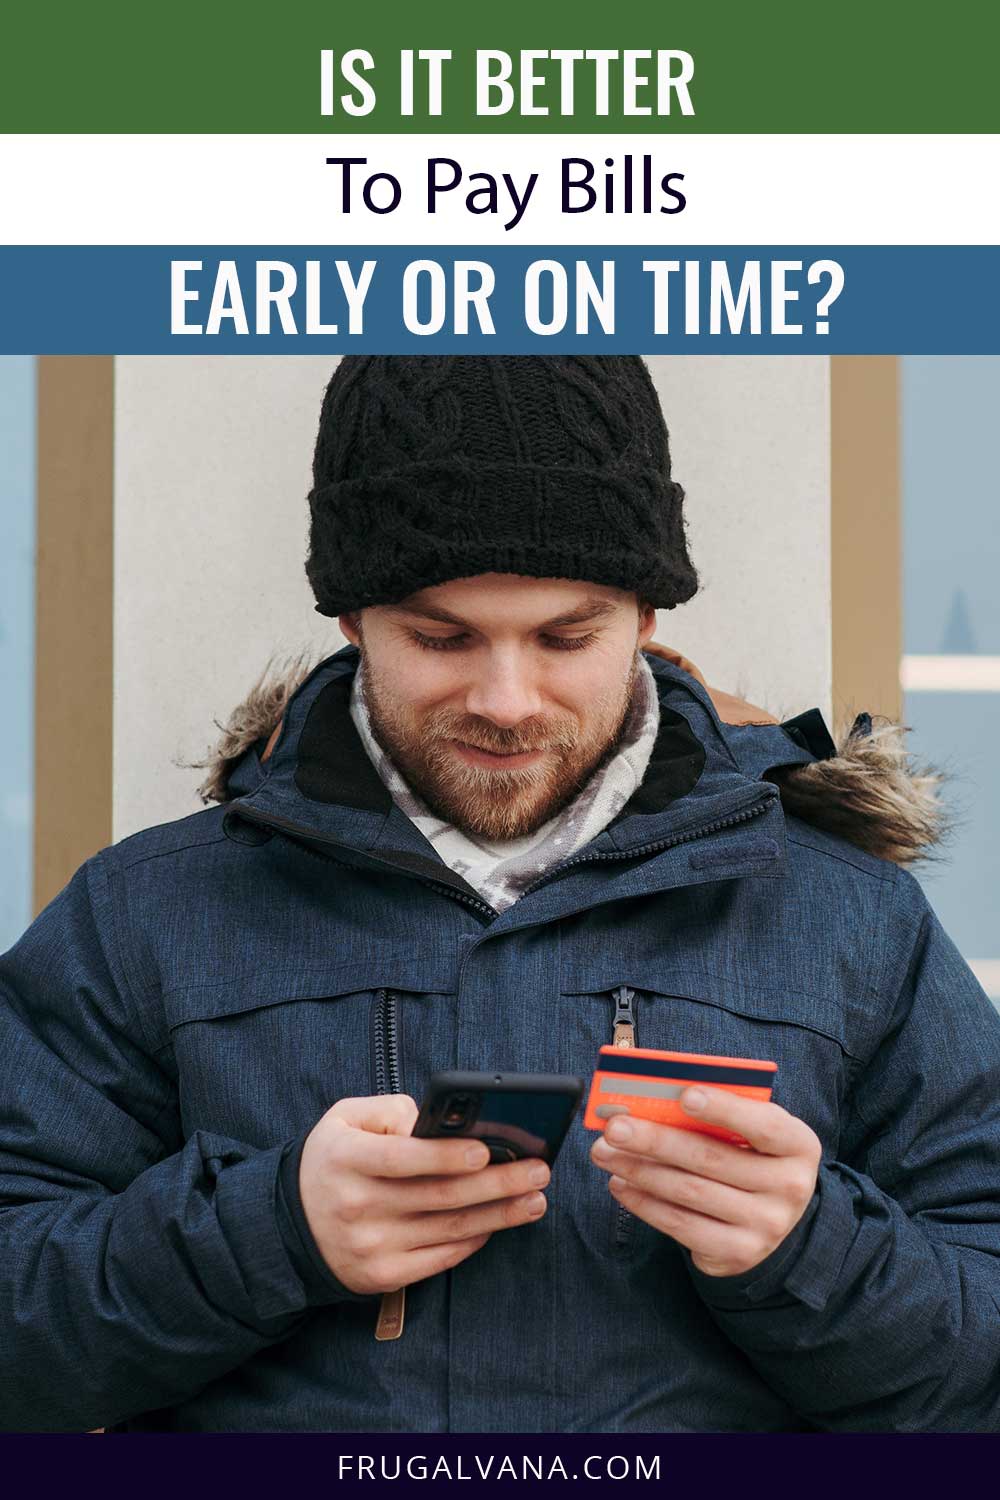 Is It Better To Pay Bills Early Or On Time?